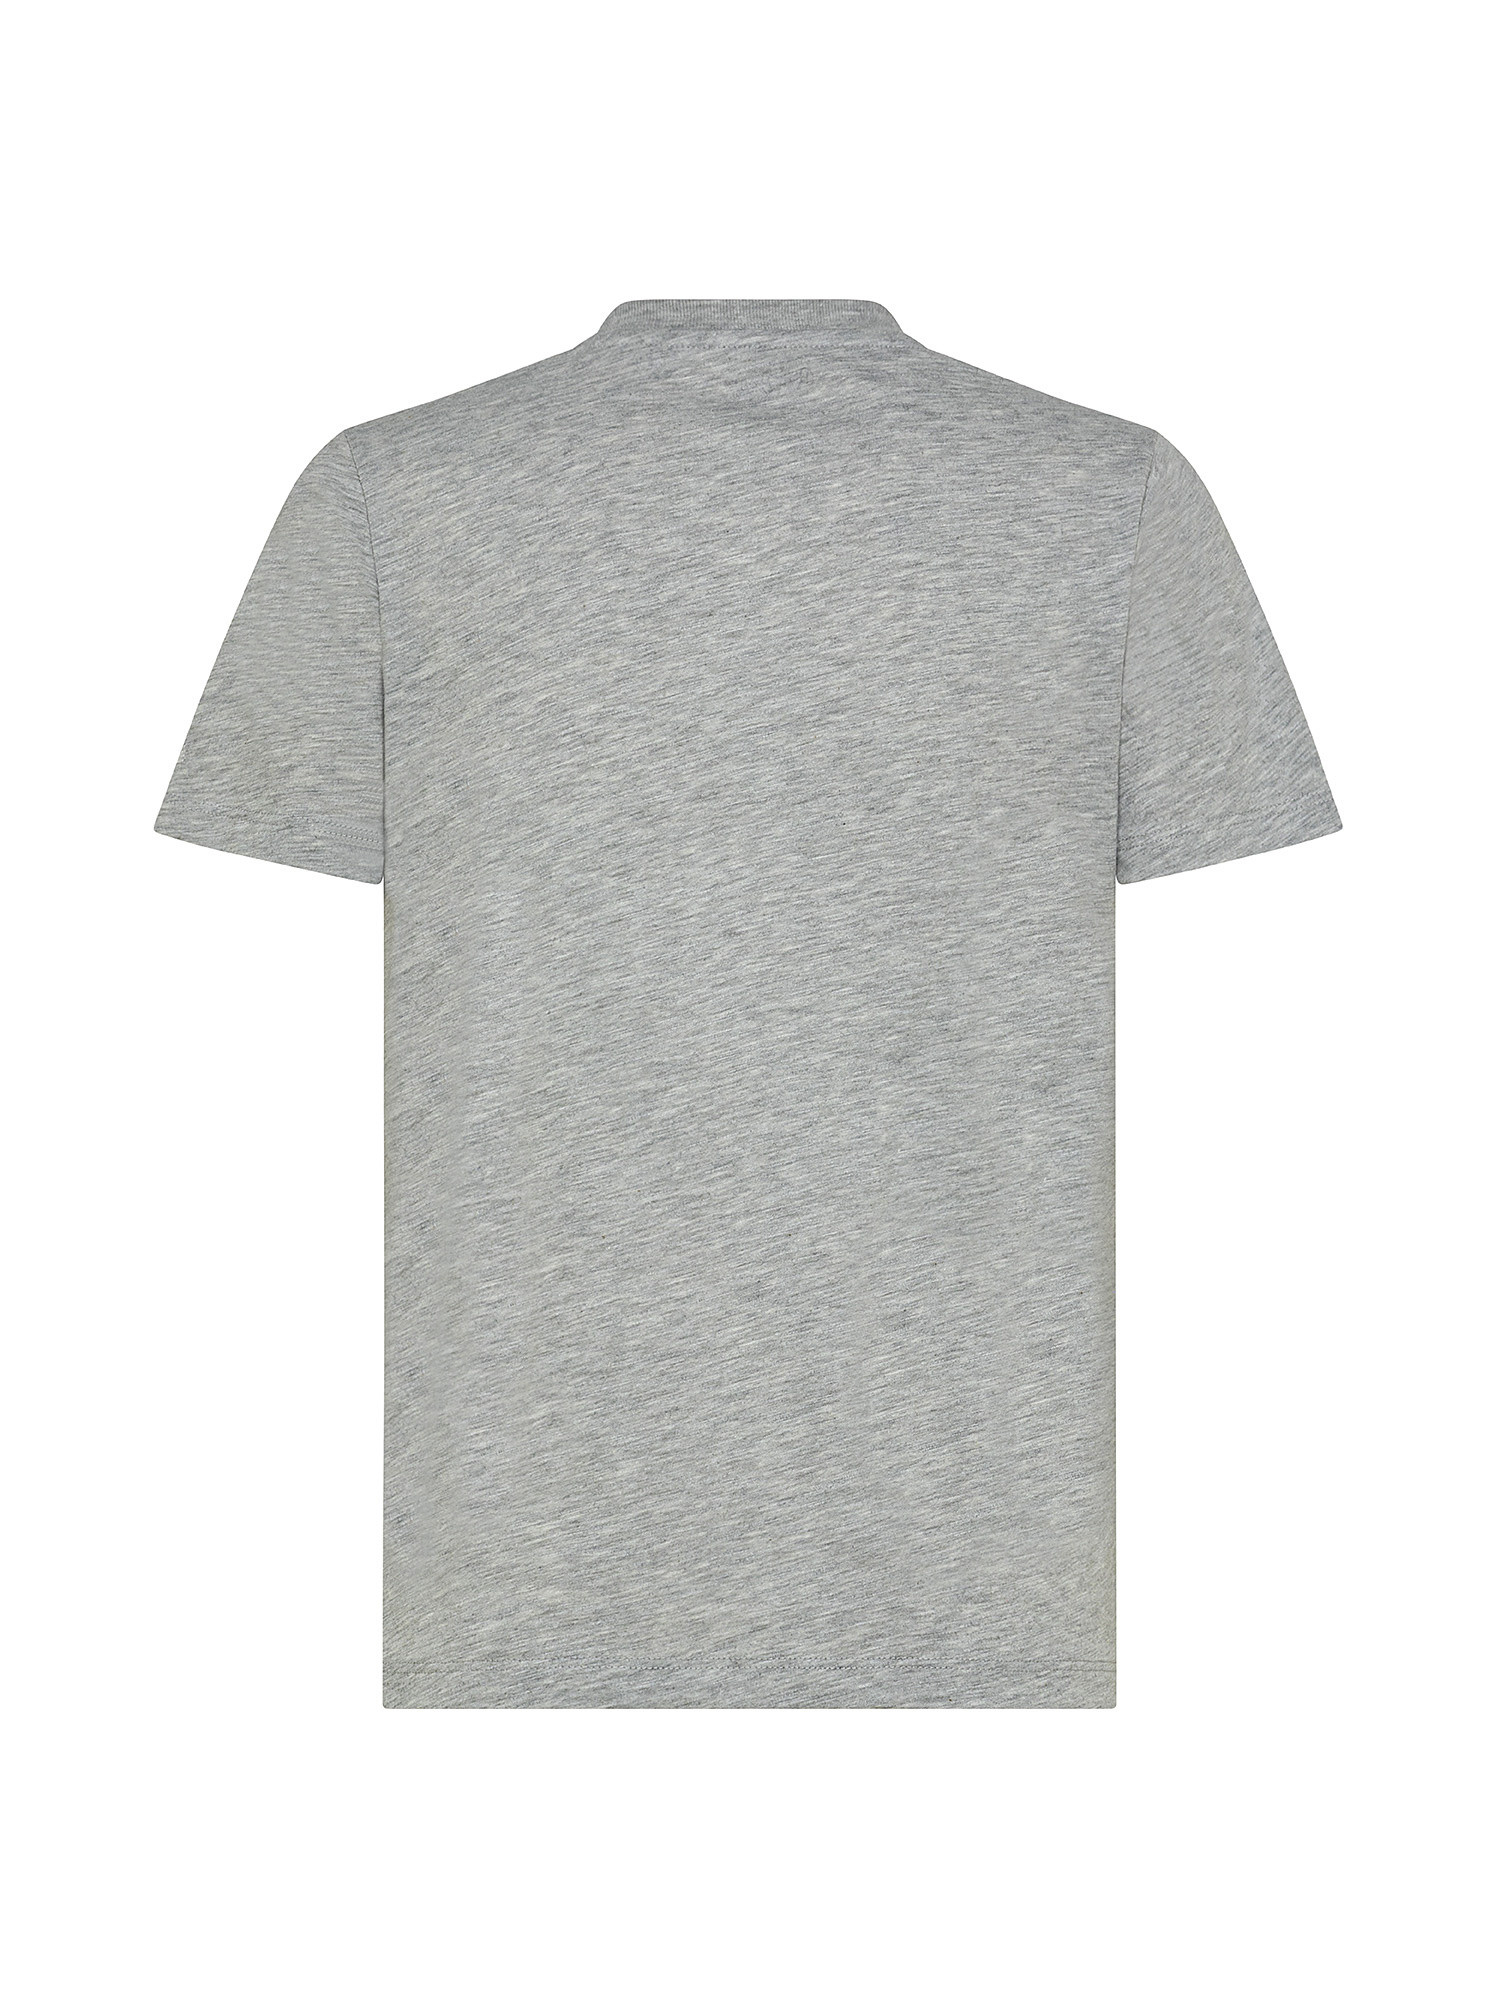 Rosemery T-shirt with logo print, Grey, large image number 1